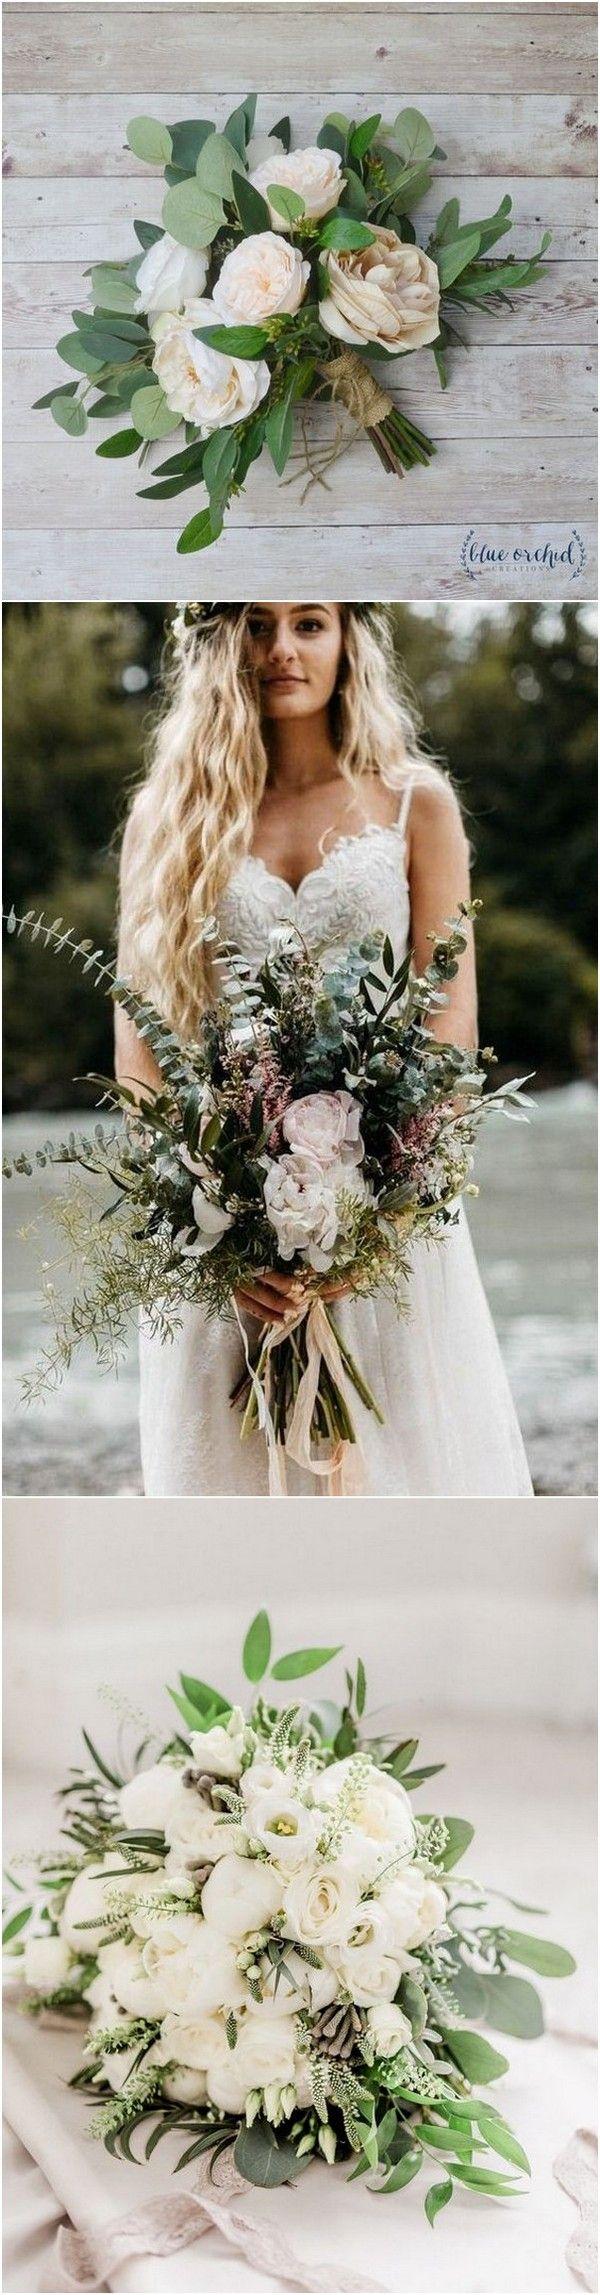 Mariage - 18 Charming Neutral Wedding Bouquets For 2018 Trends